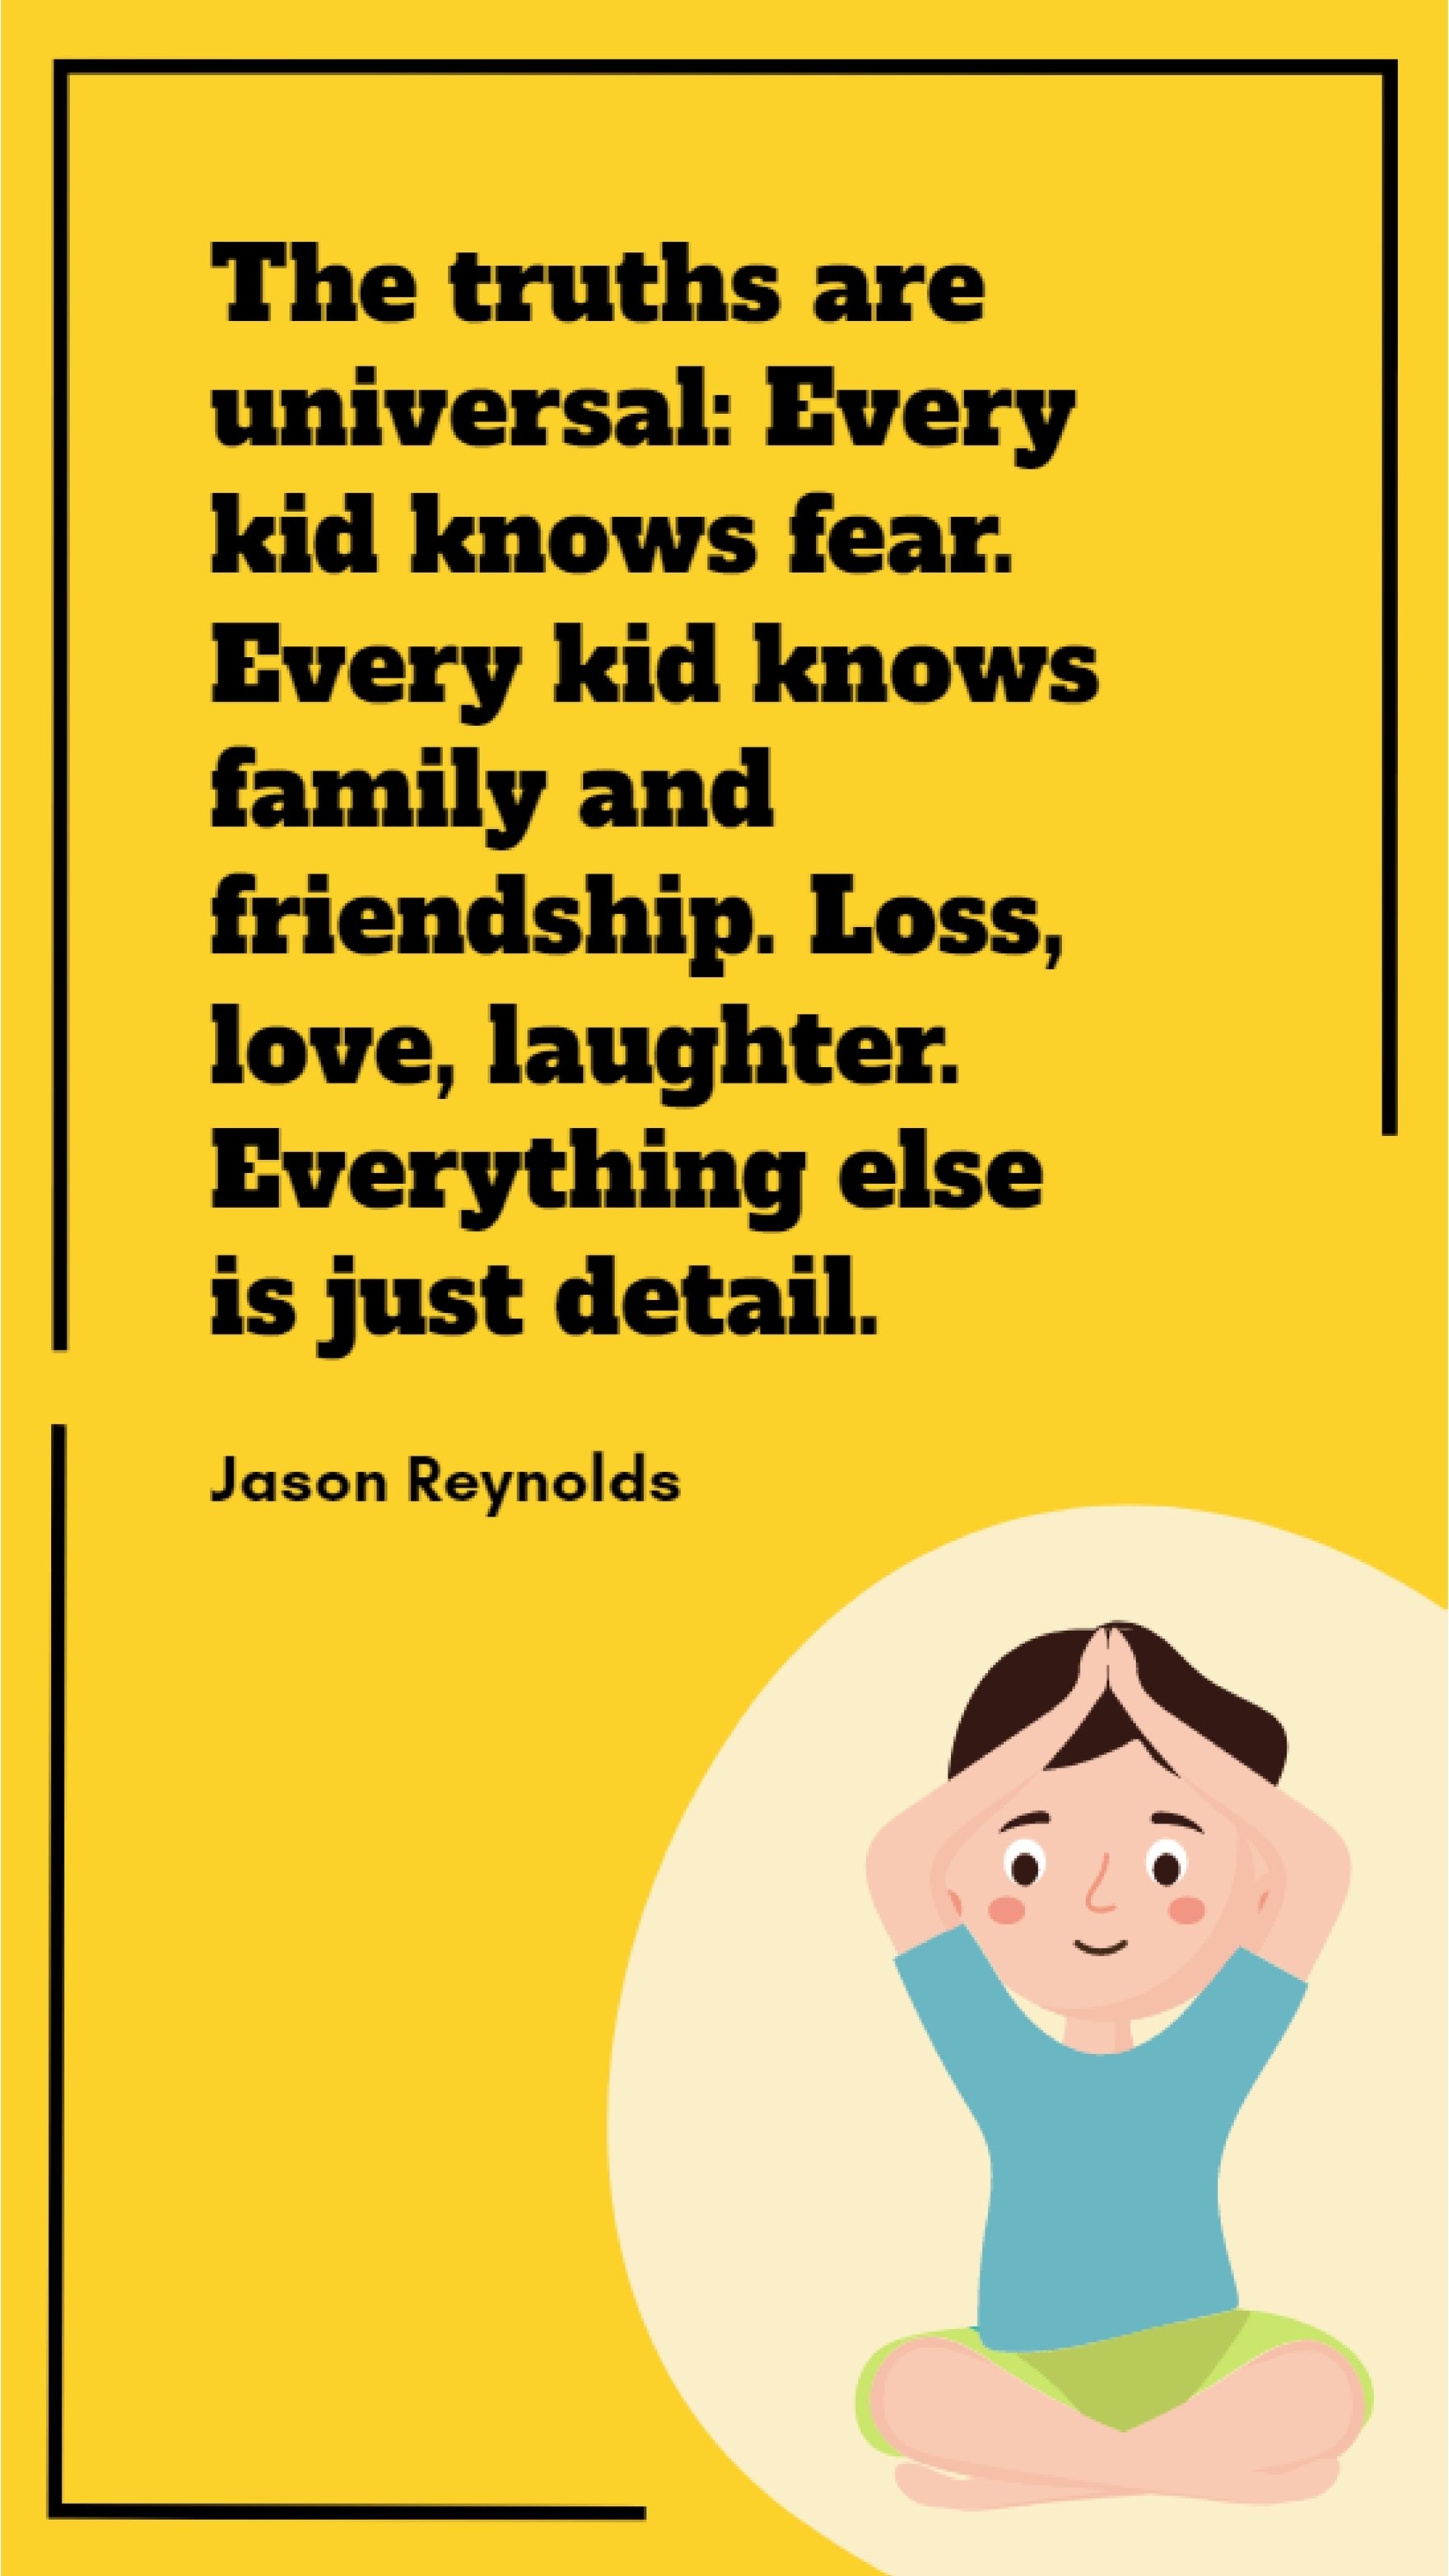 Jason Reynolds - The truths are universal: Every kid knows fear. Every kid knows family and friendship. Loss, love, laughter. Everything else is just detail. Template